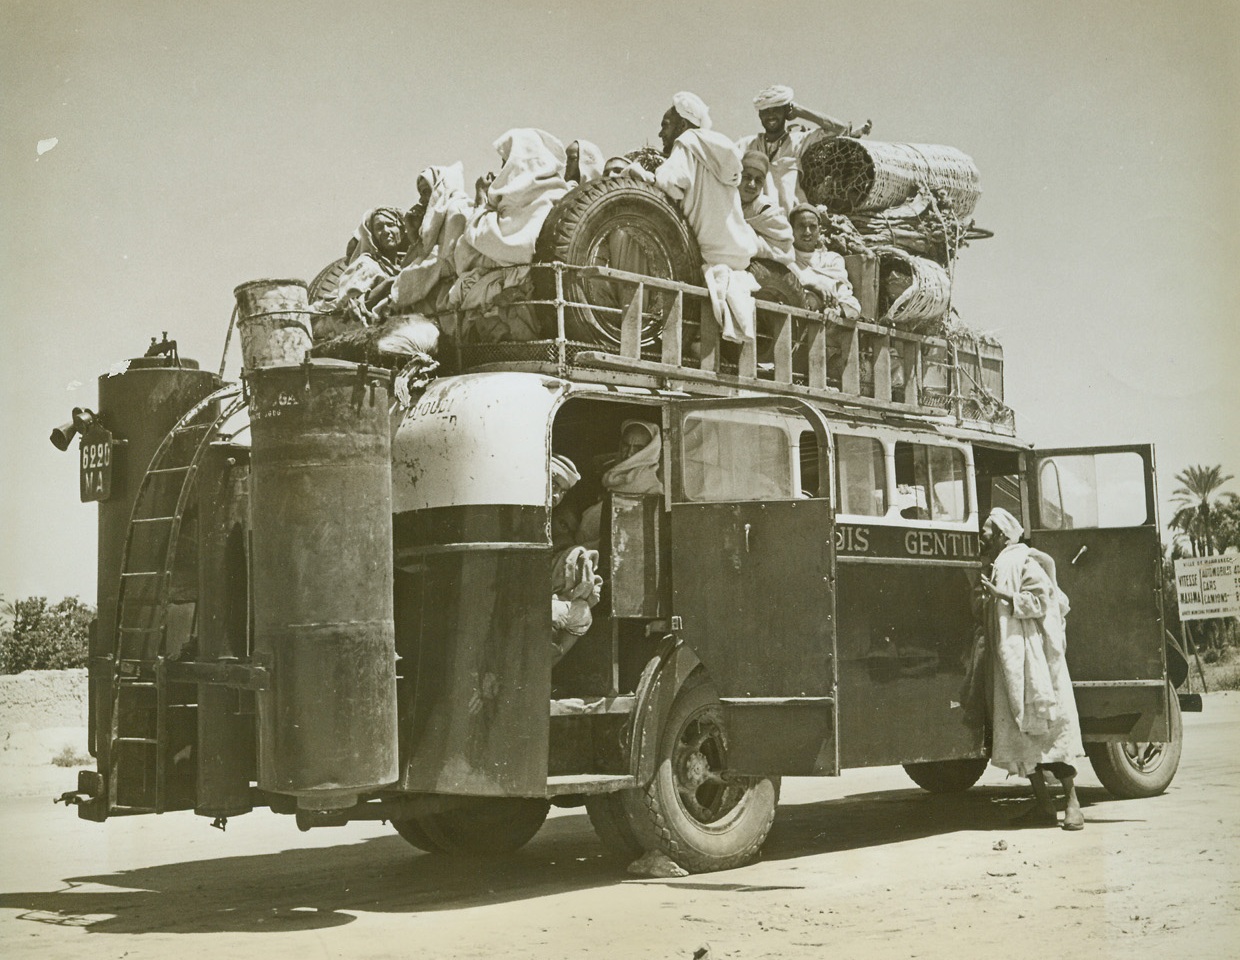 Up and Over, 6/4/1943. French Morocco - - Topside and below deck, natives of Marrakech crowd the bus that travels the main highway.  Their belongings, too, take up a large share of the space on the strange vehicle that furnishes transportation on the outskirts of the French Moroccan town.Credit line – WP – (ACME;